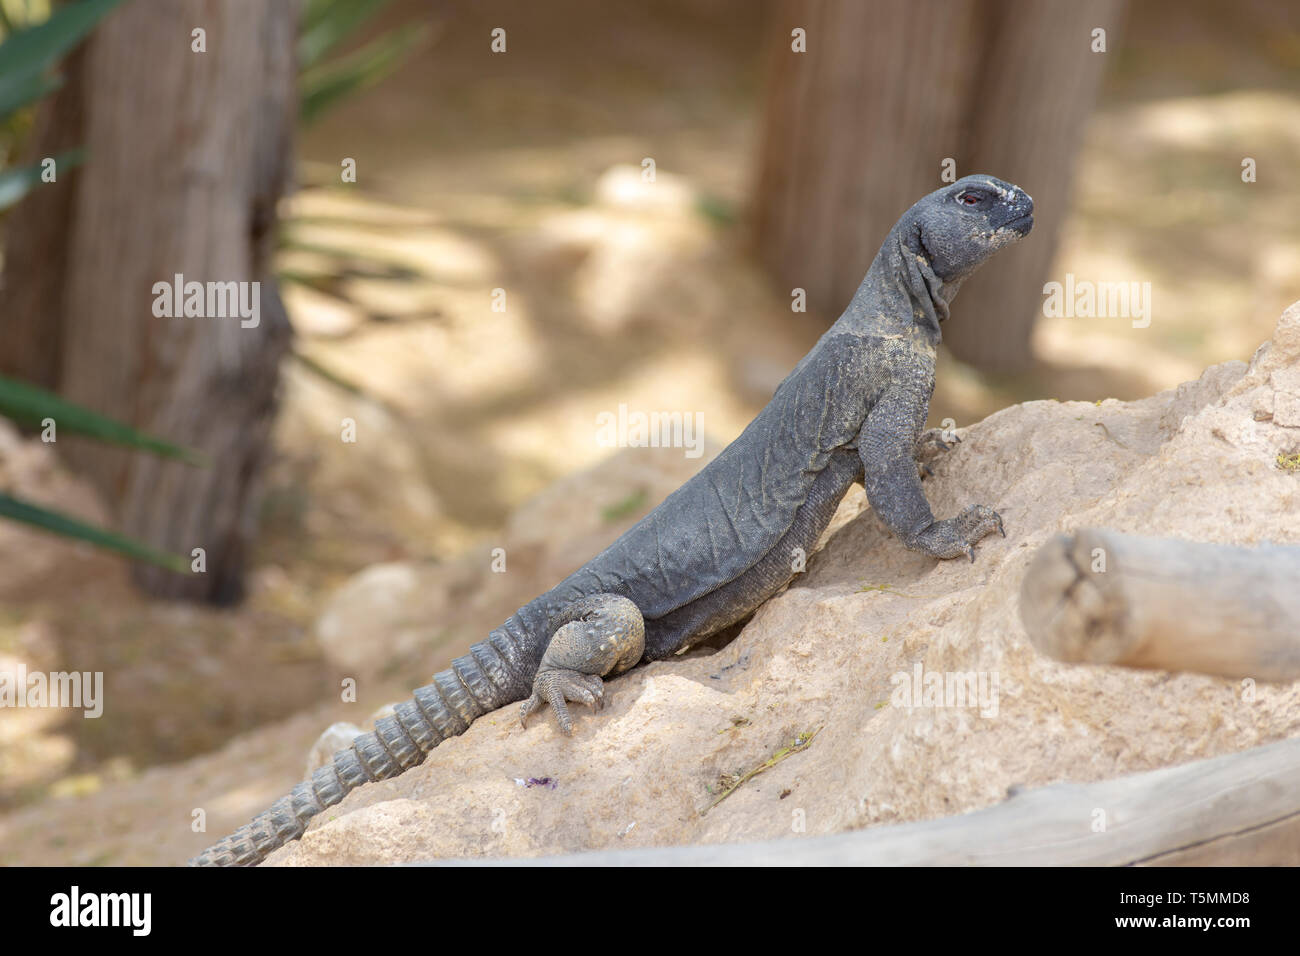 A green Leiptien's Spiny Tailed Lizard resting on a rock looking around for its next move (Uromastyx aegyptia leptieni). Stock Photo